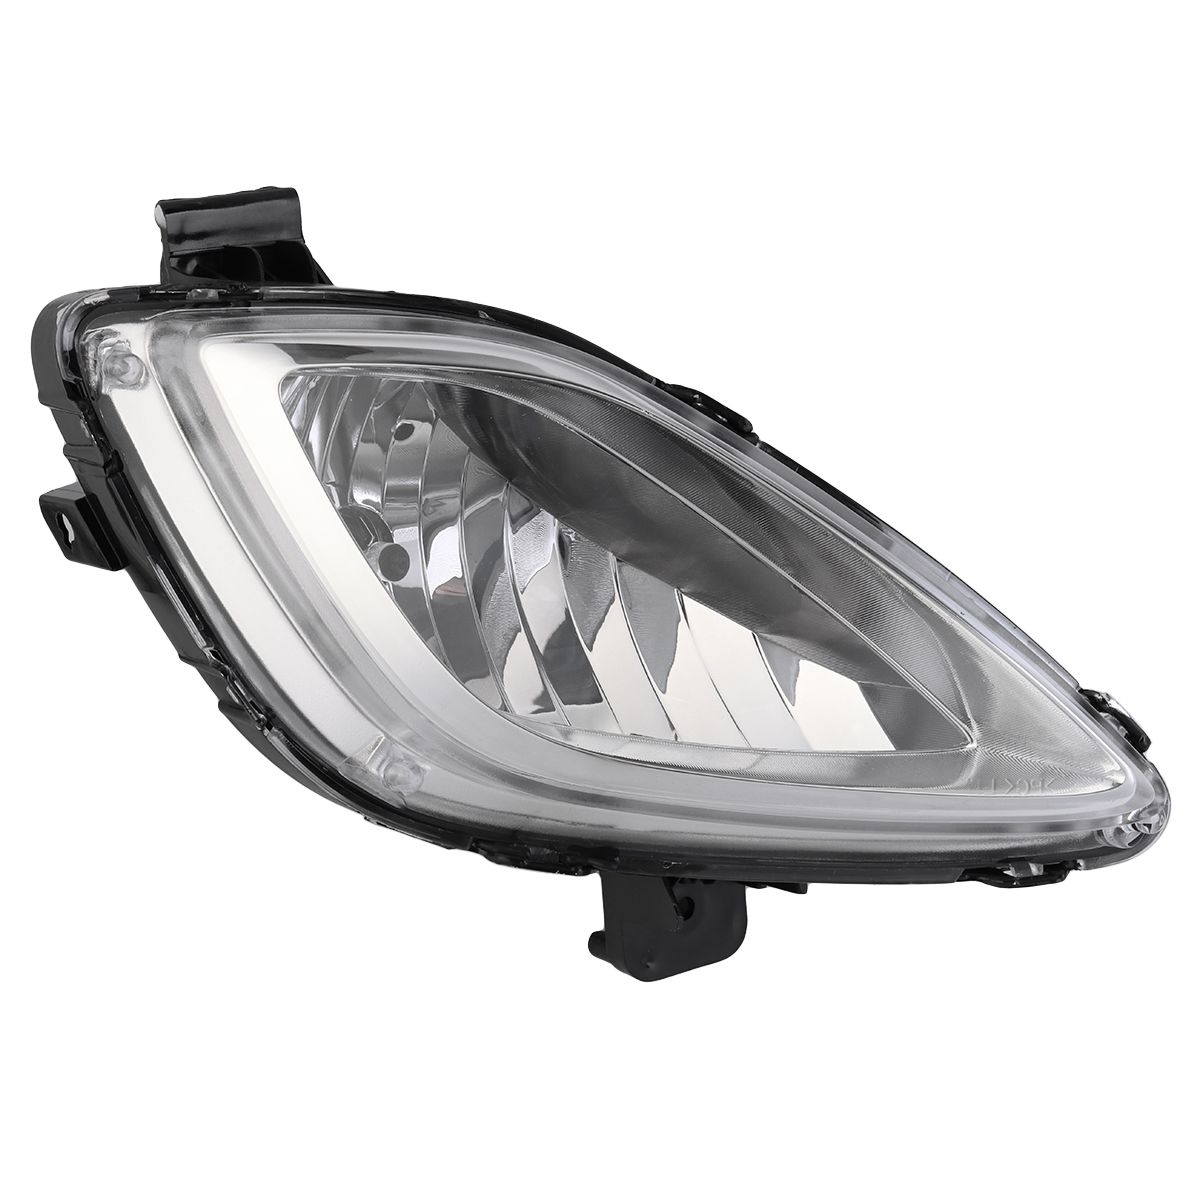 A-Pair-Left-Right-Clear-Front-Bumper-Car-Fog-Lights-Lamps-For-Hyundai-Elantra-2011-2013-1280884